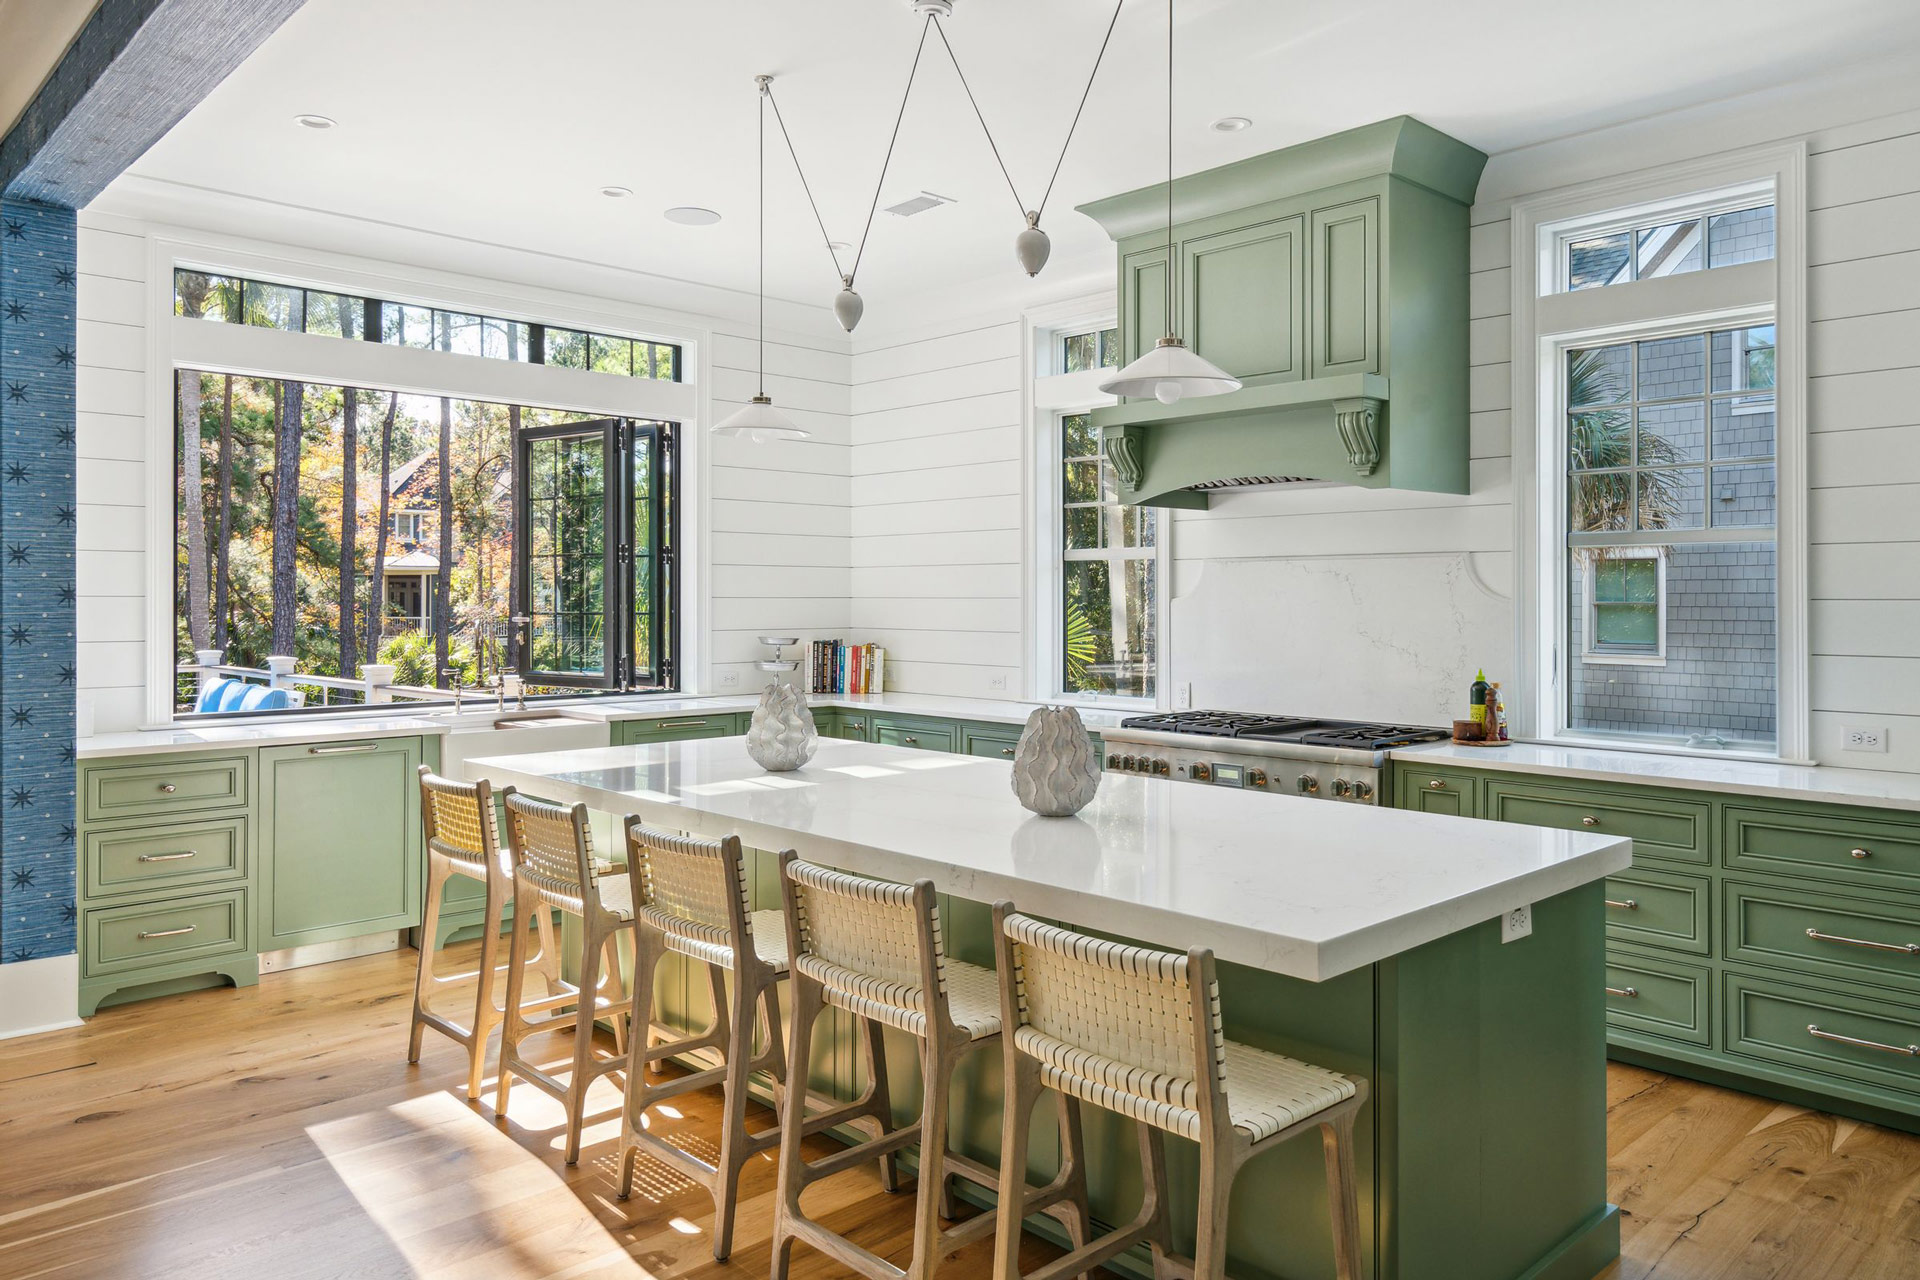 Coastal Carolina kitchen with mossy green cabinets, large island, and accordion window at counter height opening to the rear pool deck